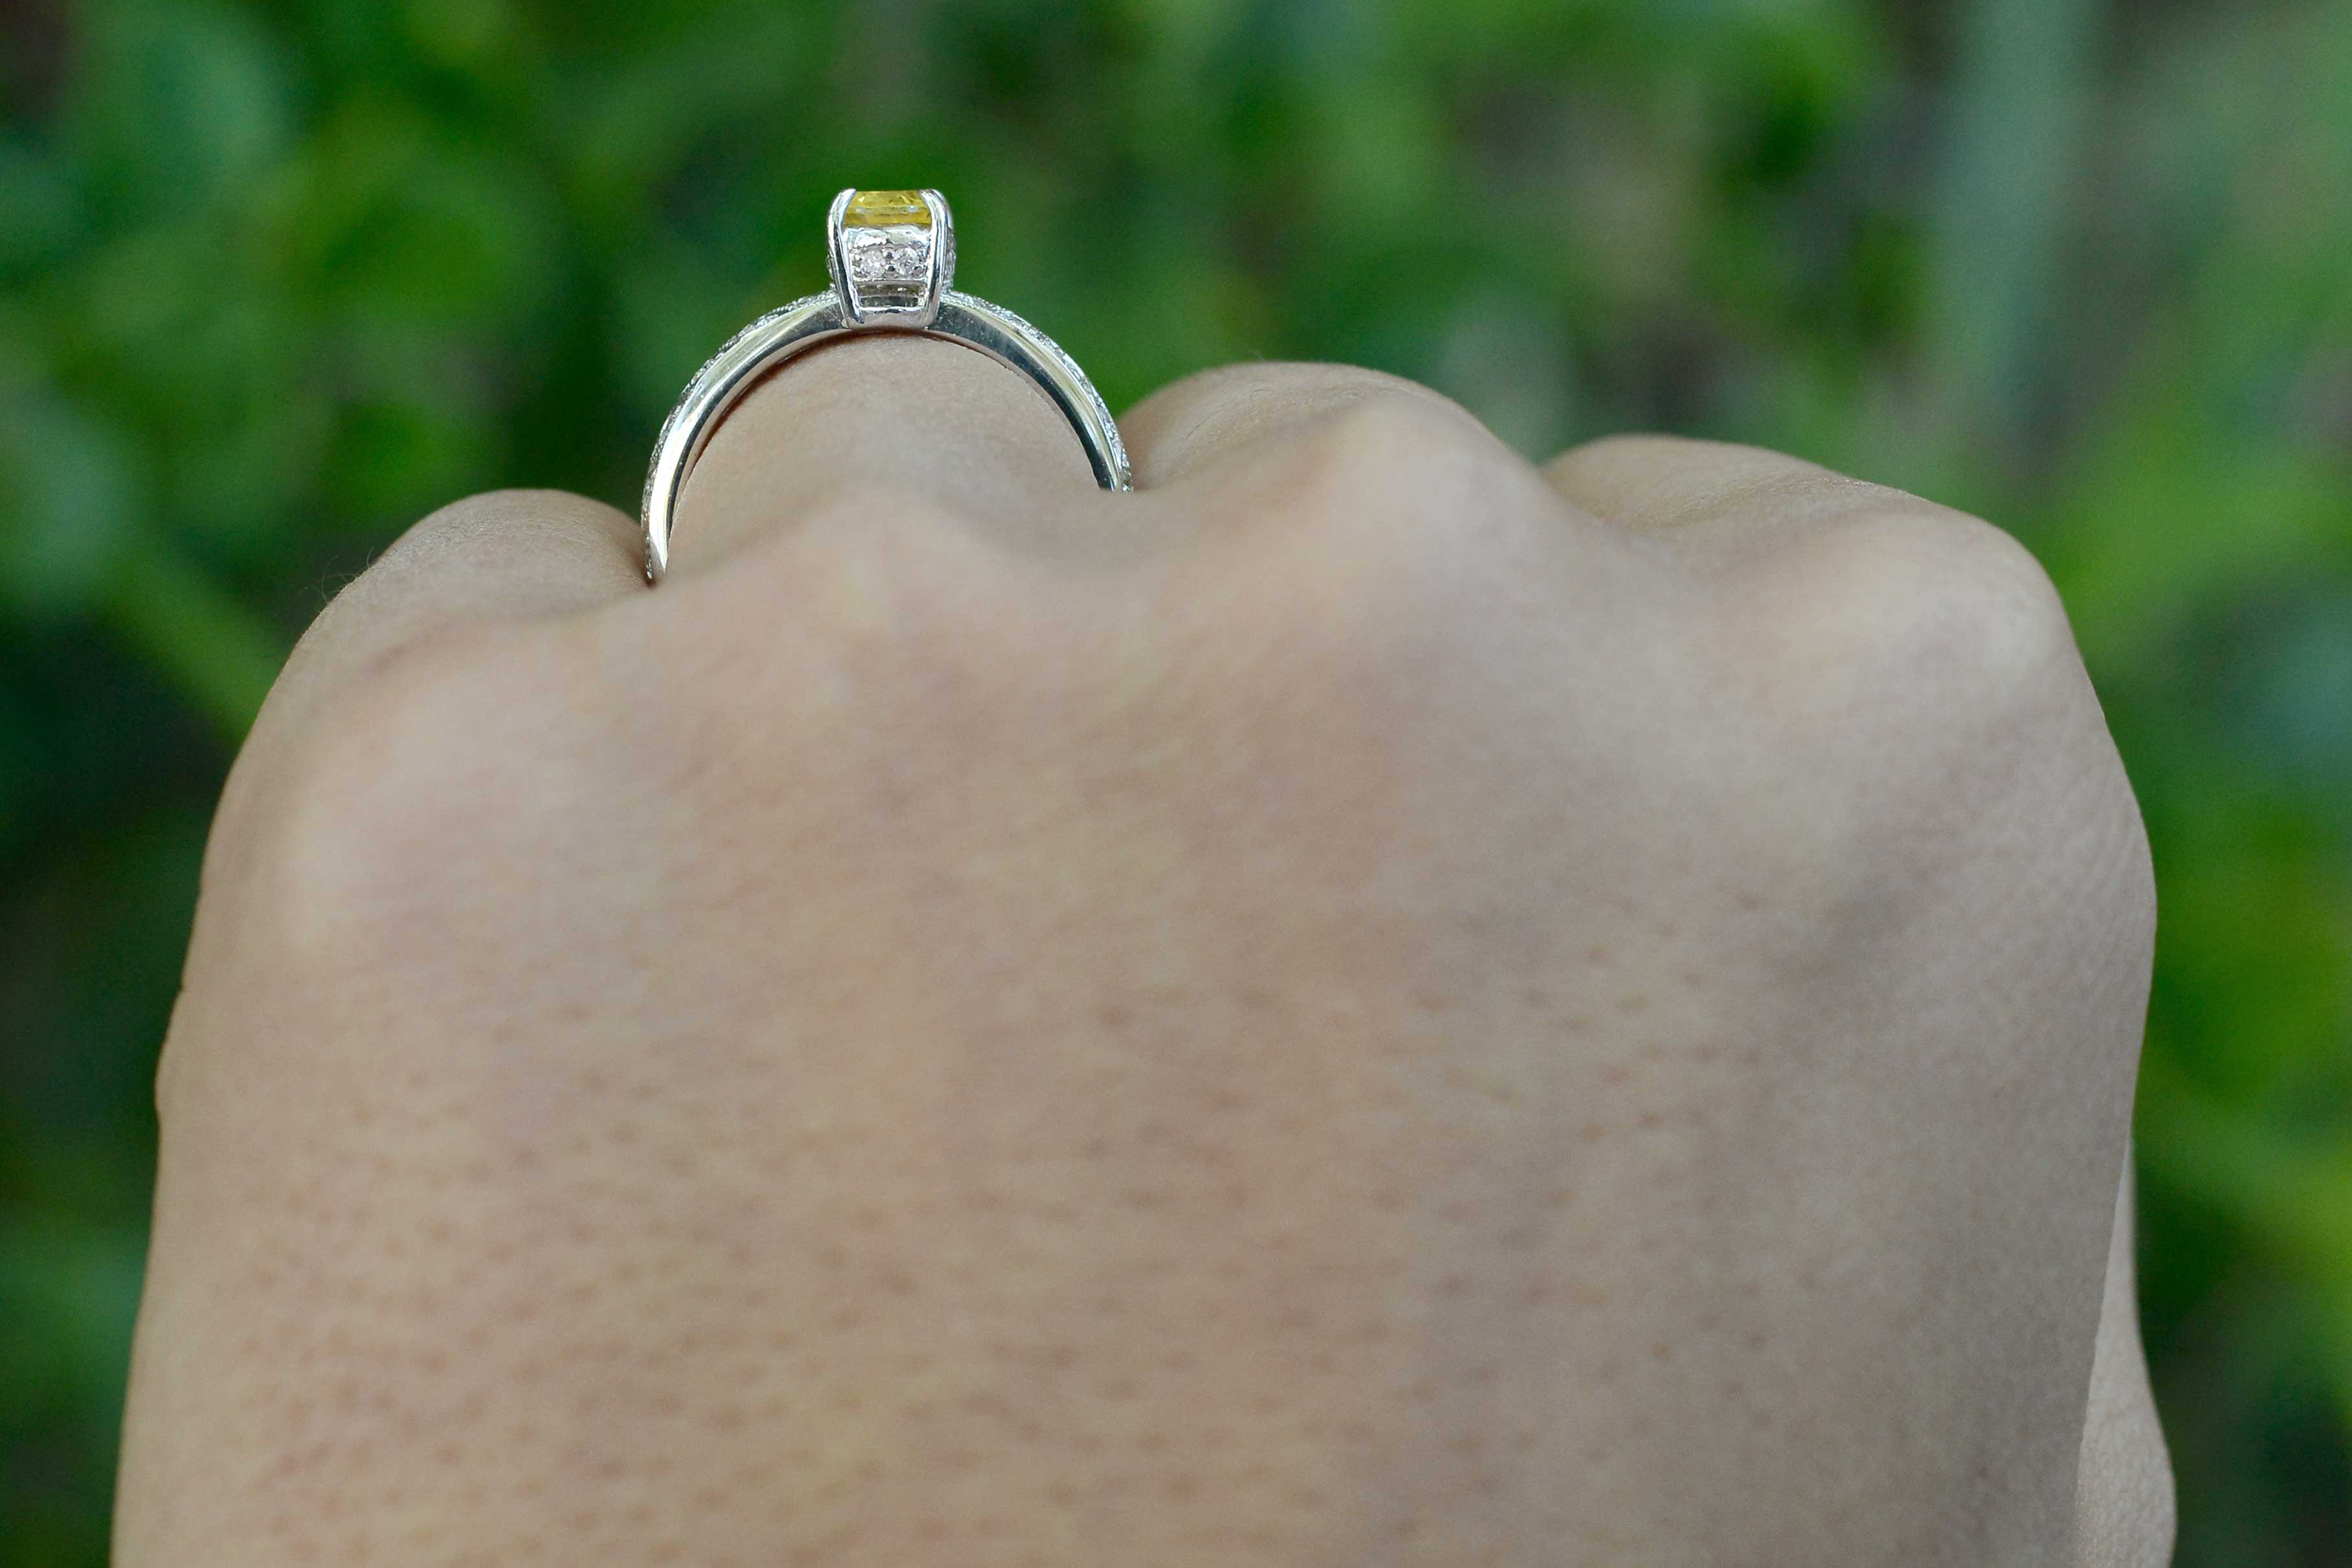 Yellow sapphire 18k white gold engagement ring with a crown setting.